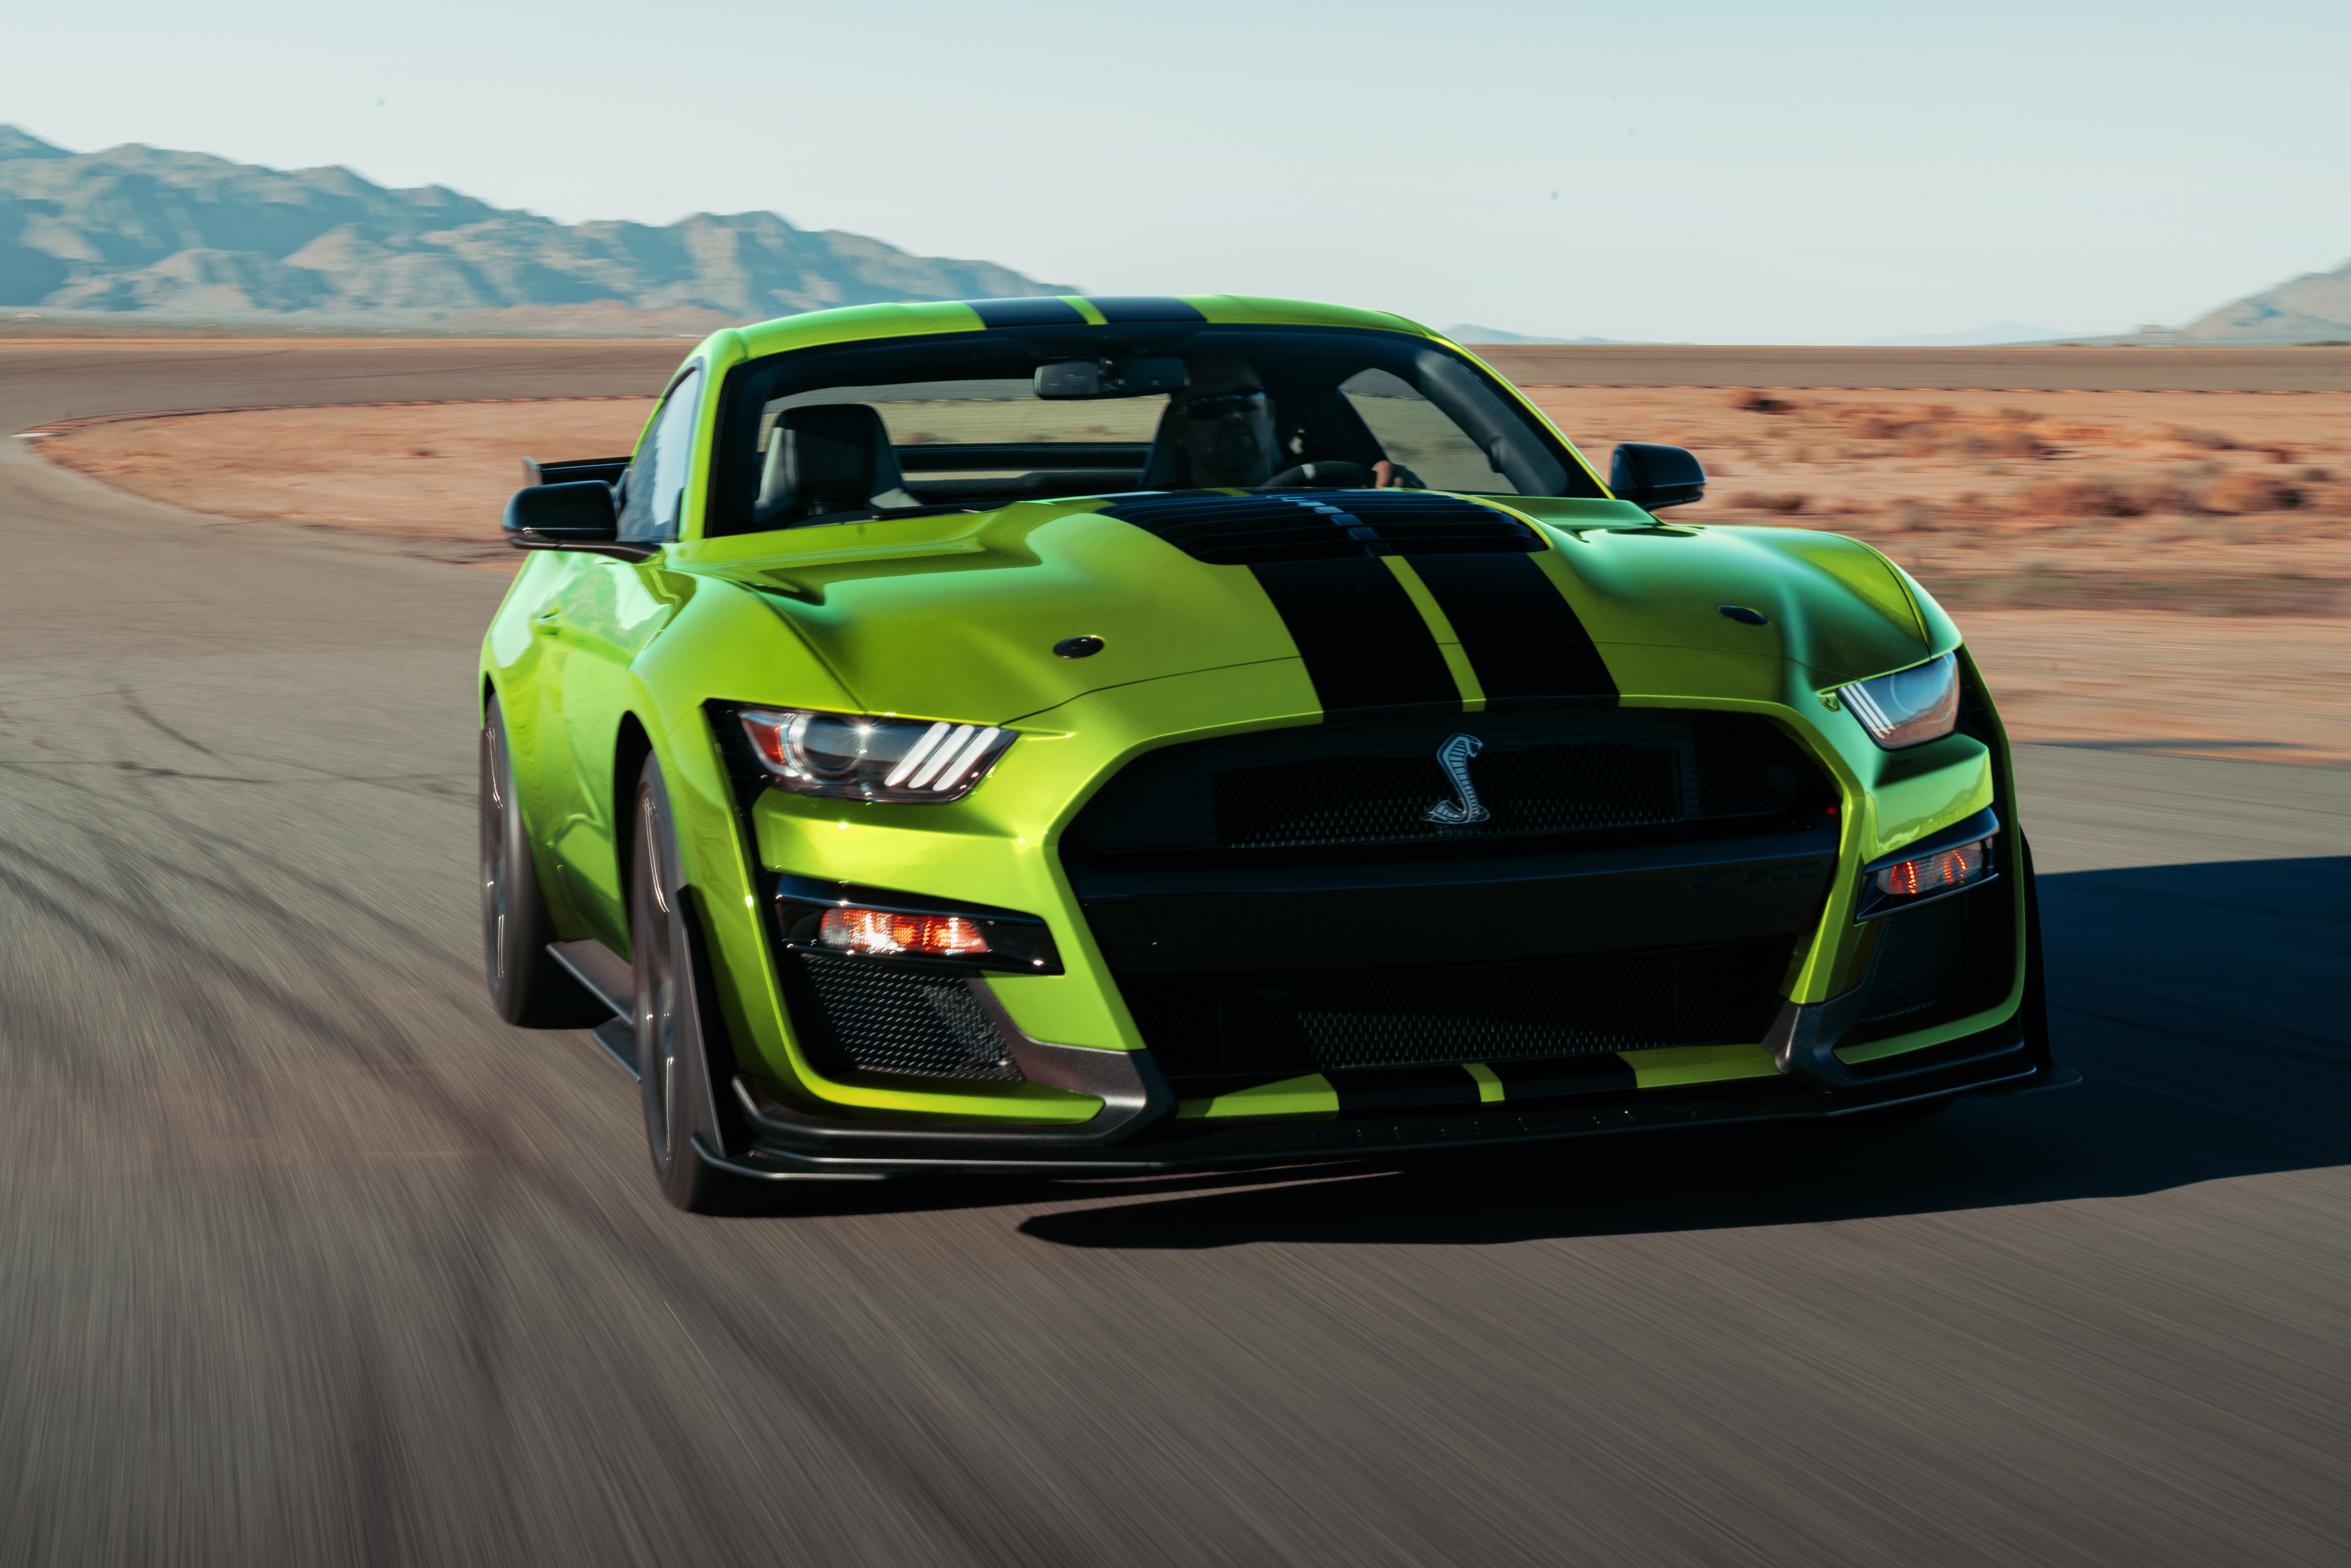 Car Ford Ford Mustang Ford Mustang Shelby Gt500 Green Car Muscle Car Vehicle 7746x5167